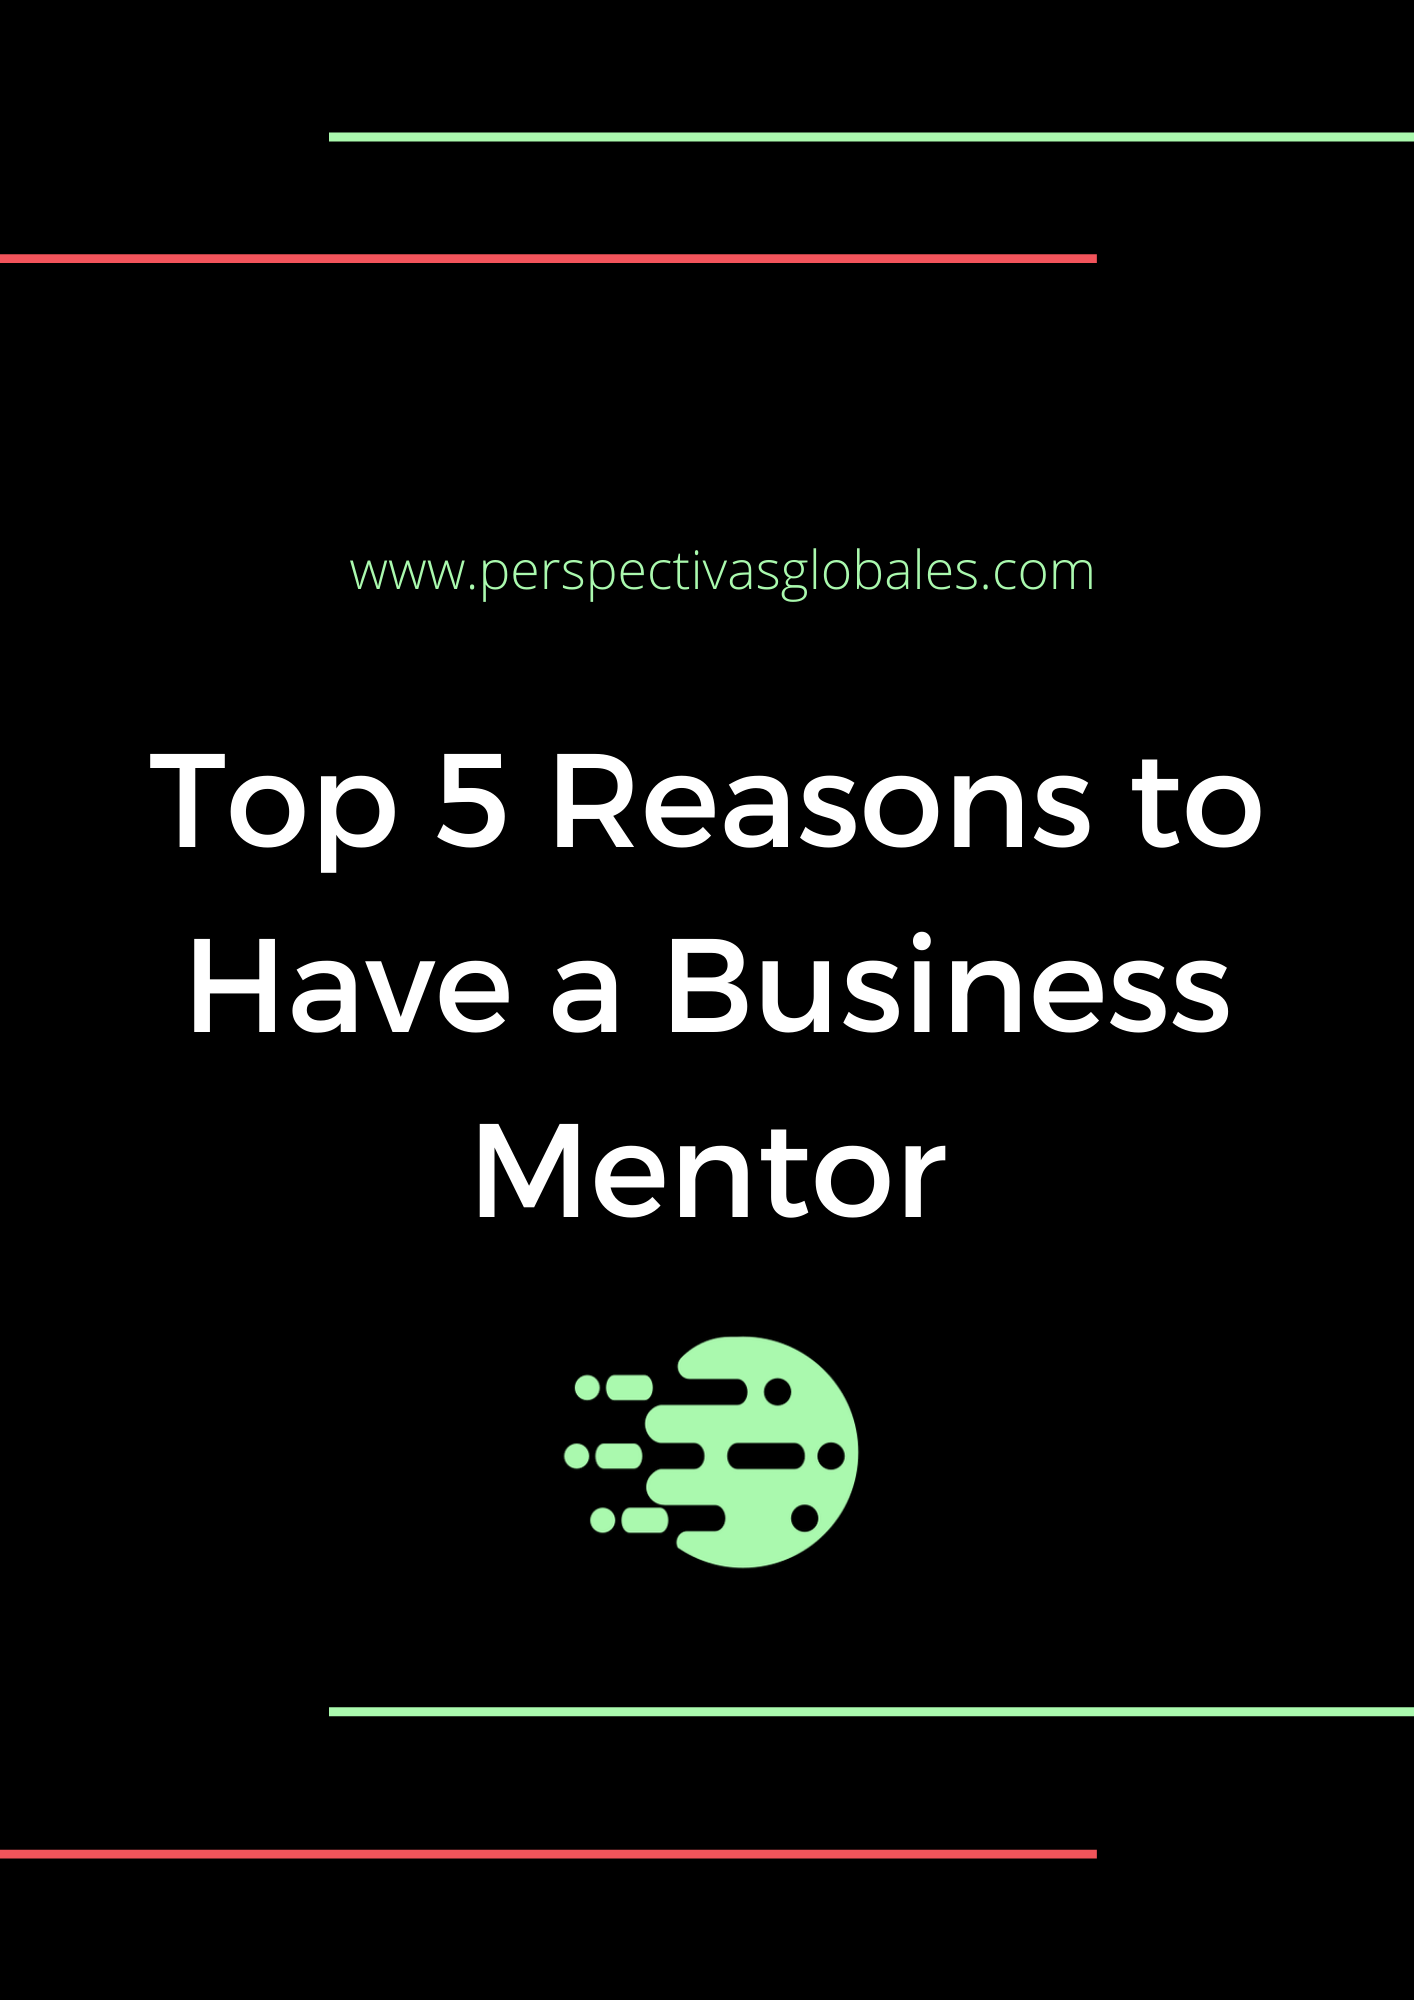 Top 5 Reasons to Have a Business Mentor